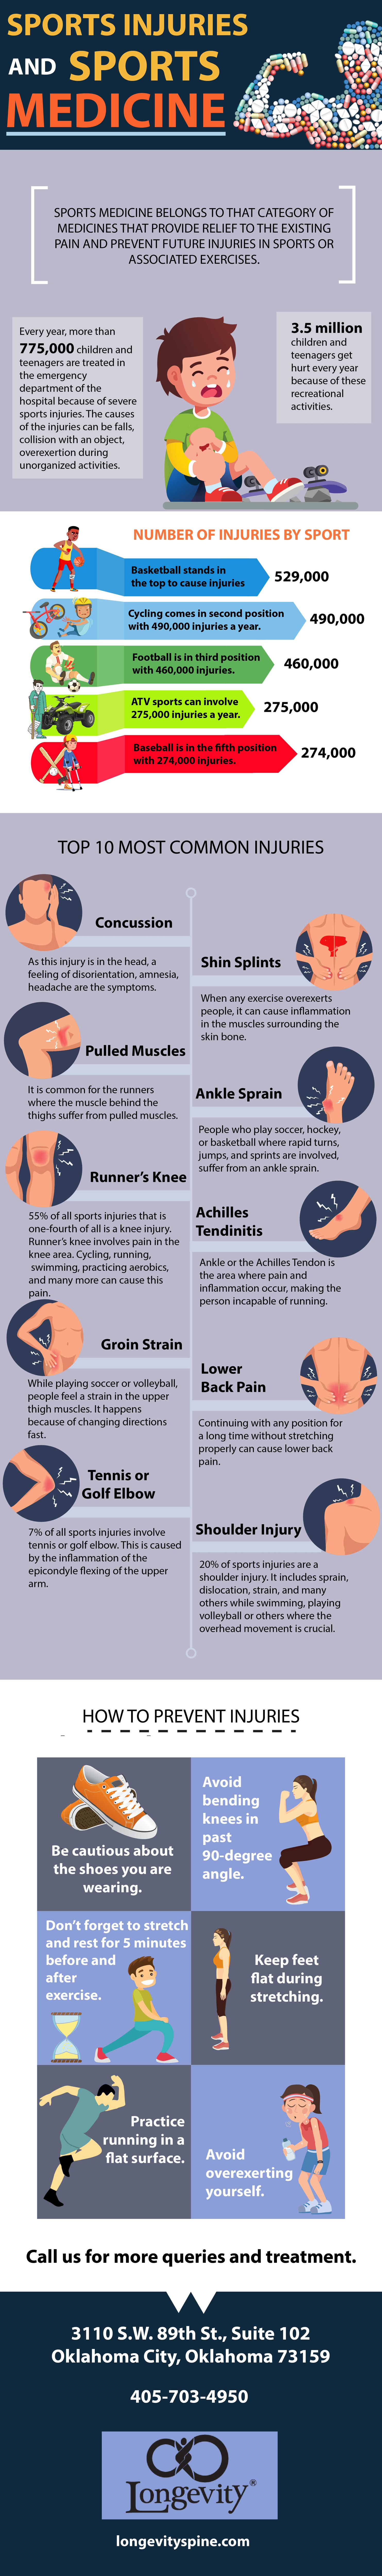 sports medicine and sports injuries infographic